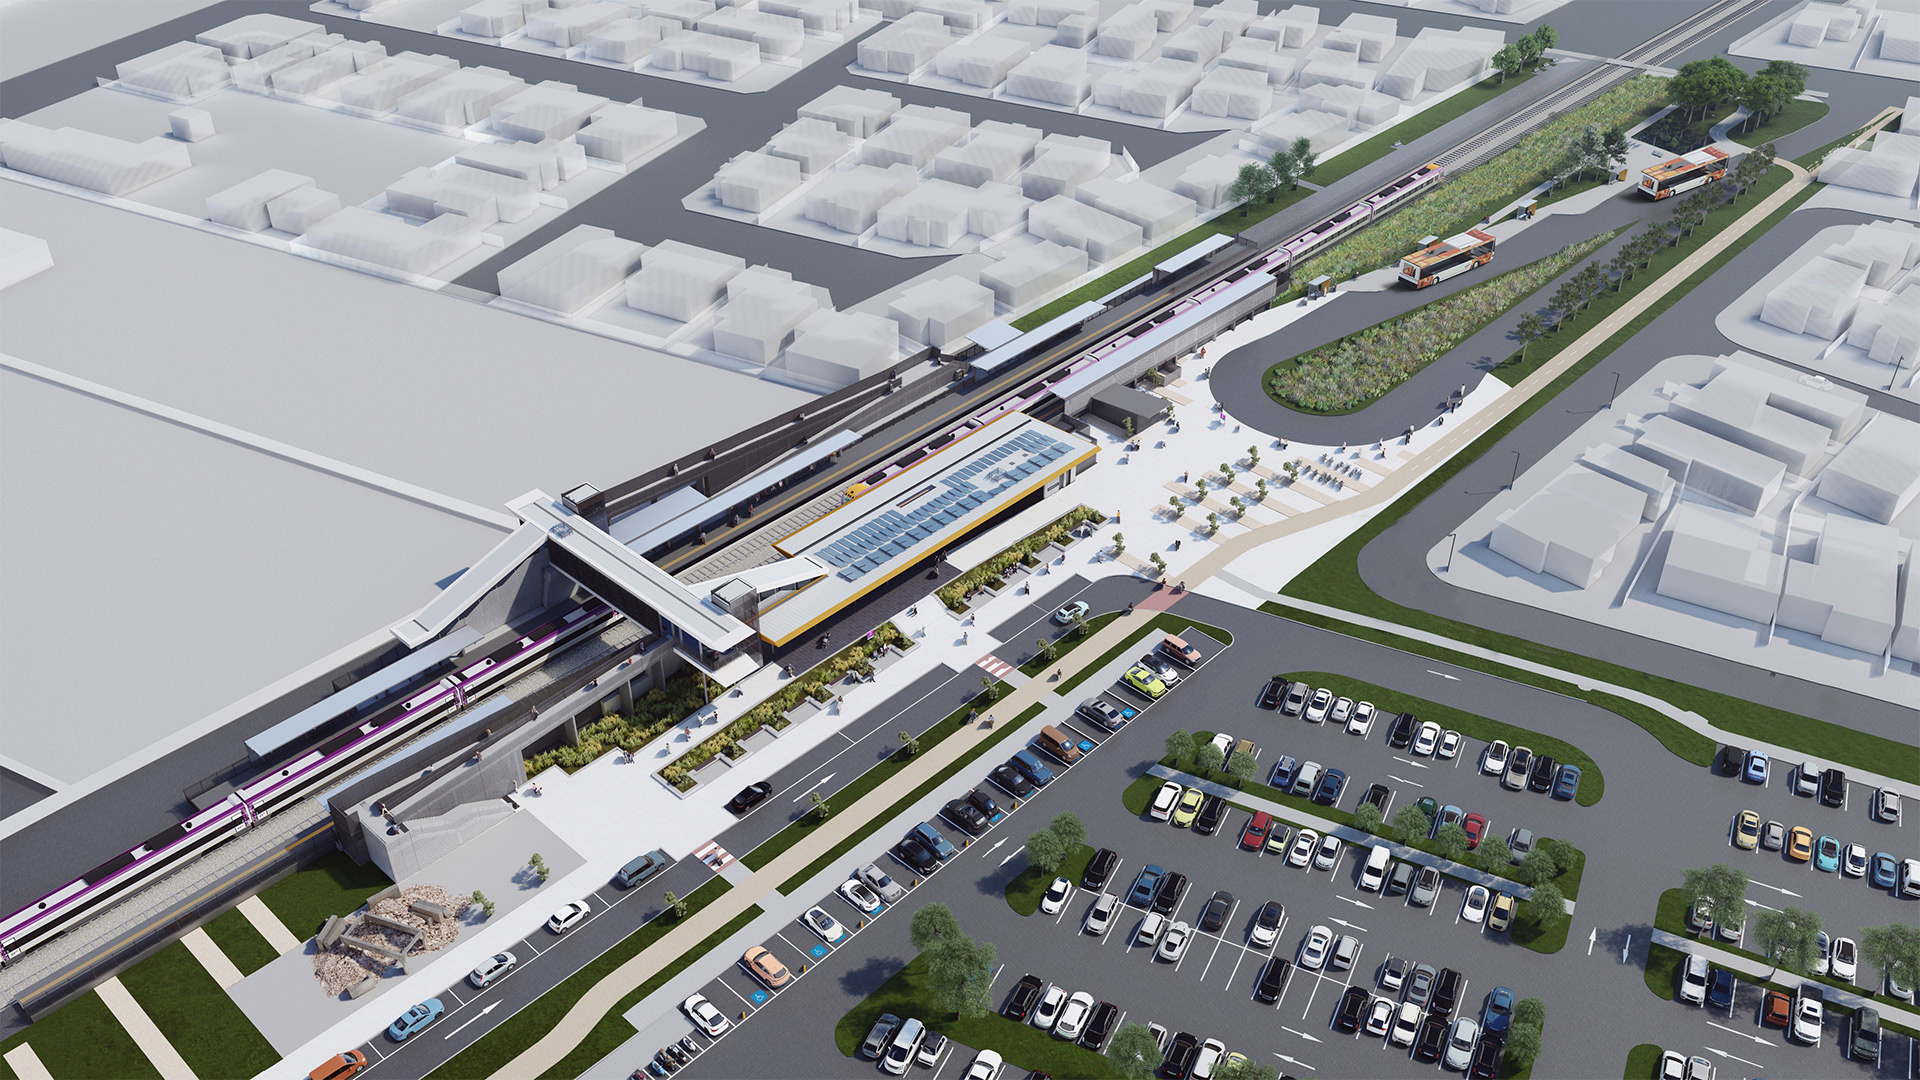 Aerial concept of Marshall Station. The bottom right-hand corner of the image shows vehicles parked in the car park at Marshall Station. In the left hand-side of the image the heritage concrete remnants of the cement pipe factory can be seen next to the accessible ramp from the station platform. In the middle ground of the image, a V/Line train can be seen waiting at the station platform.